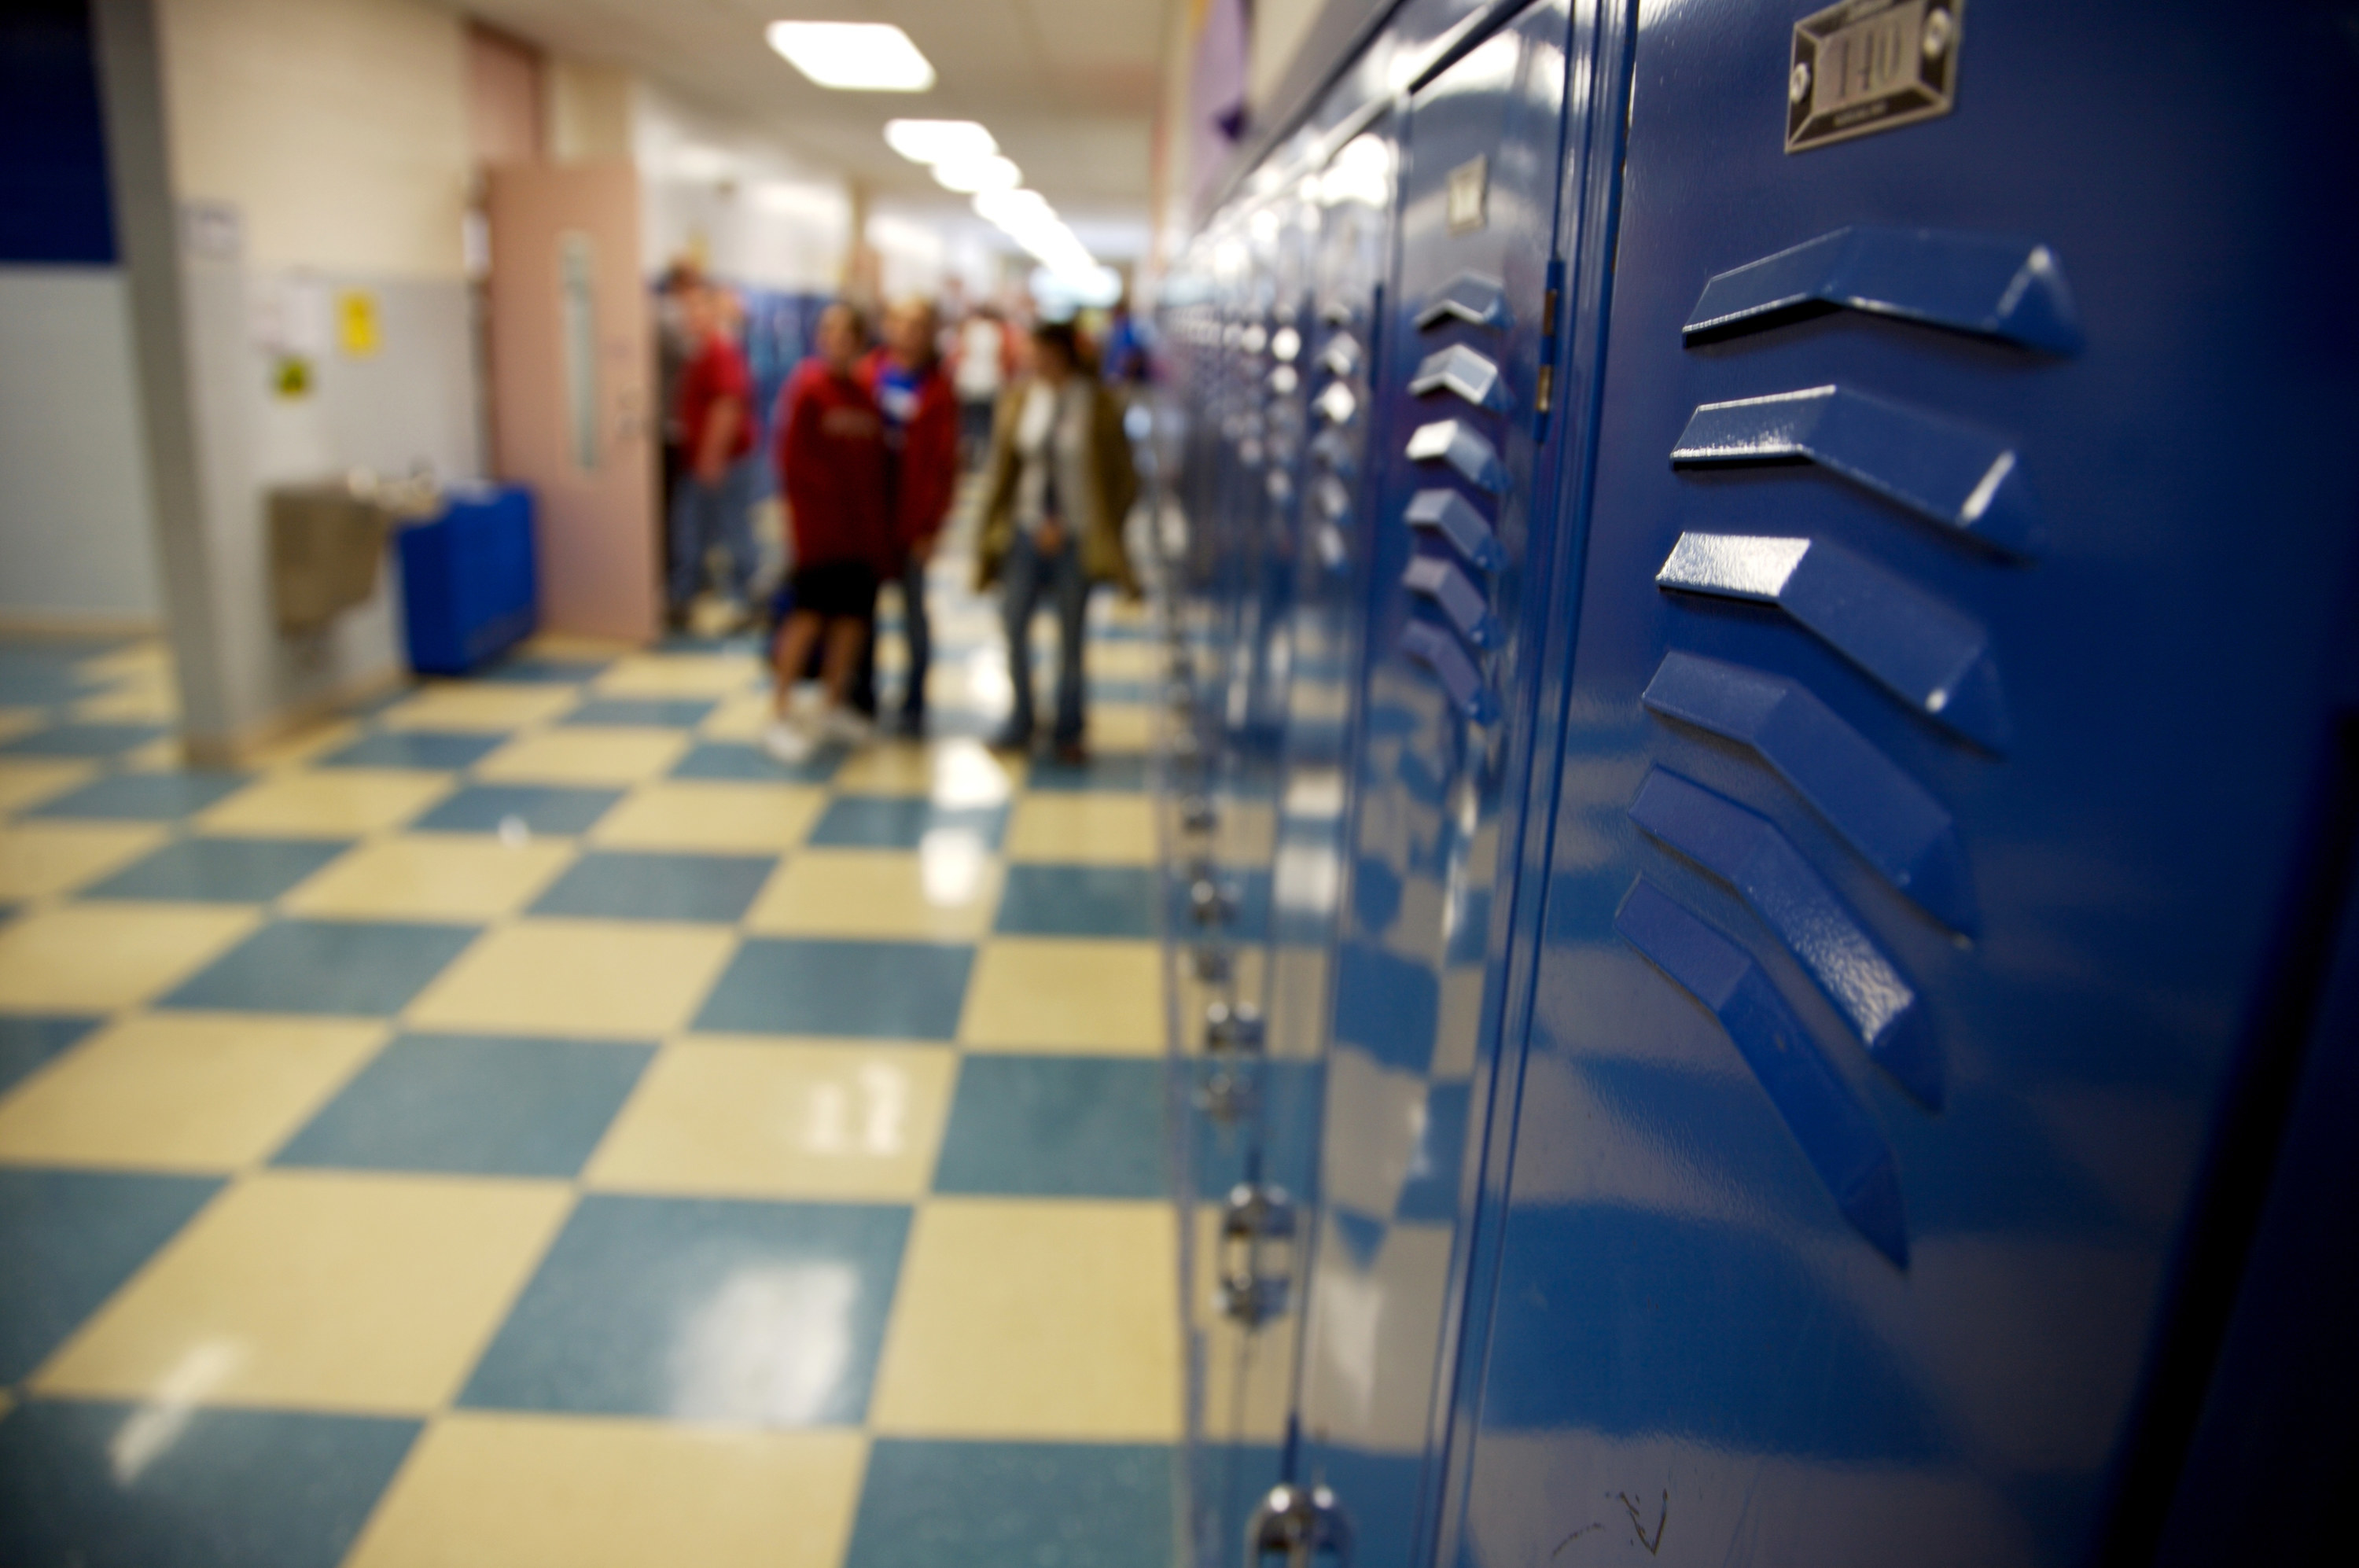 blurred students walking through a hall filled with lockers